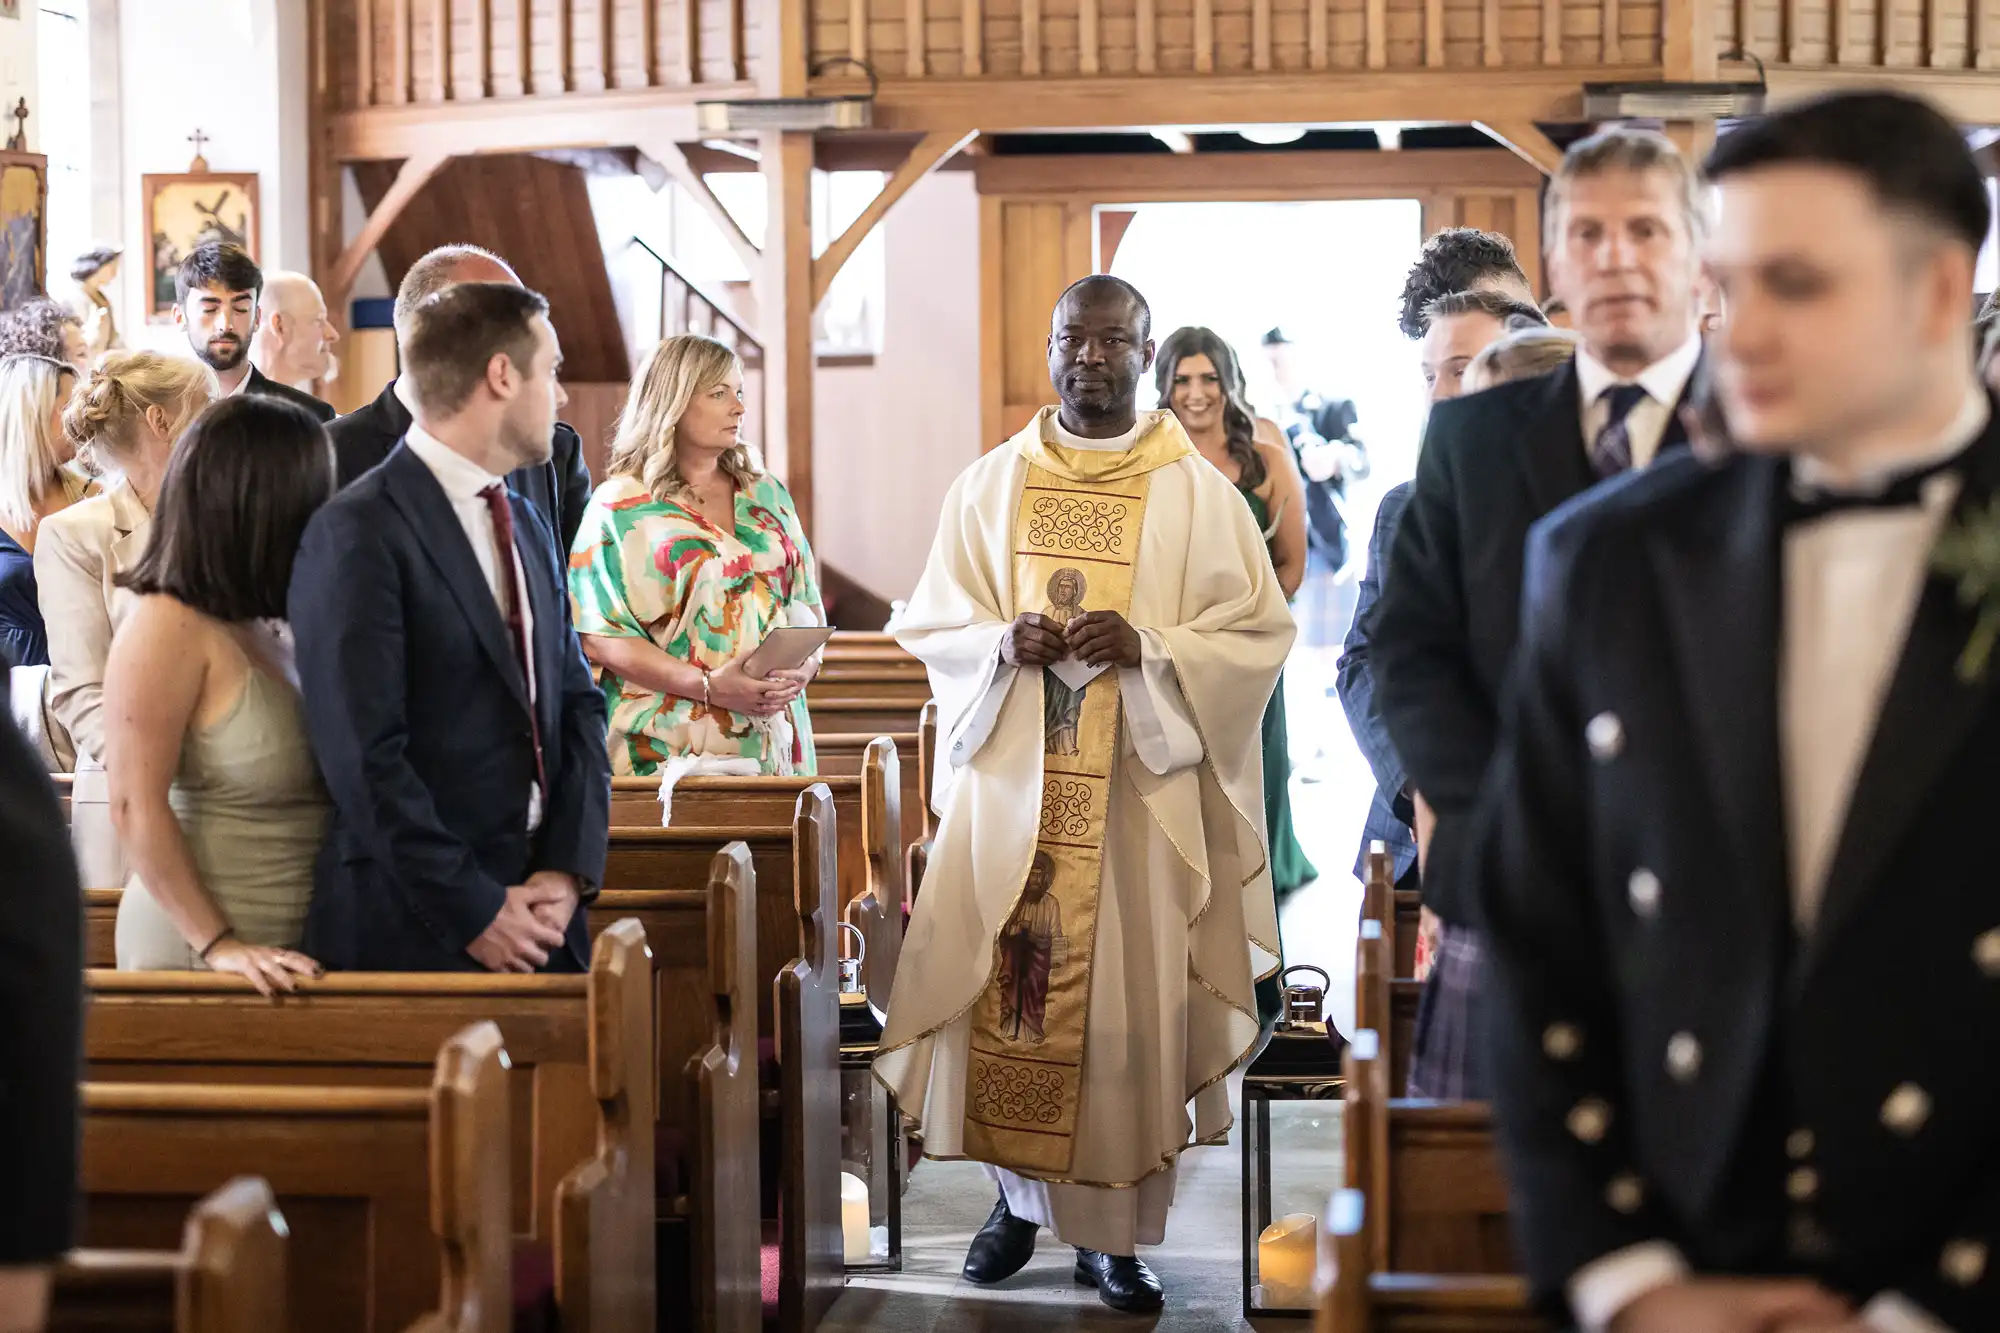 A priest walking down the aisle of a church during a wedding ceremony, with guests turning to look as he passes by.